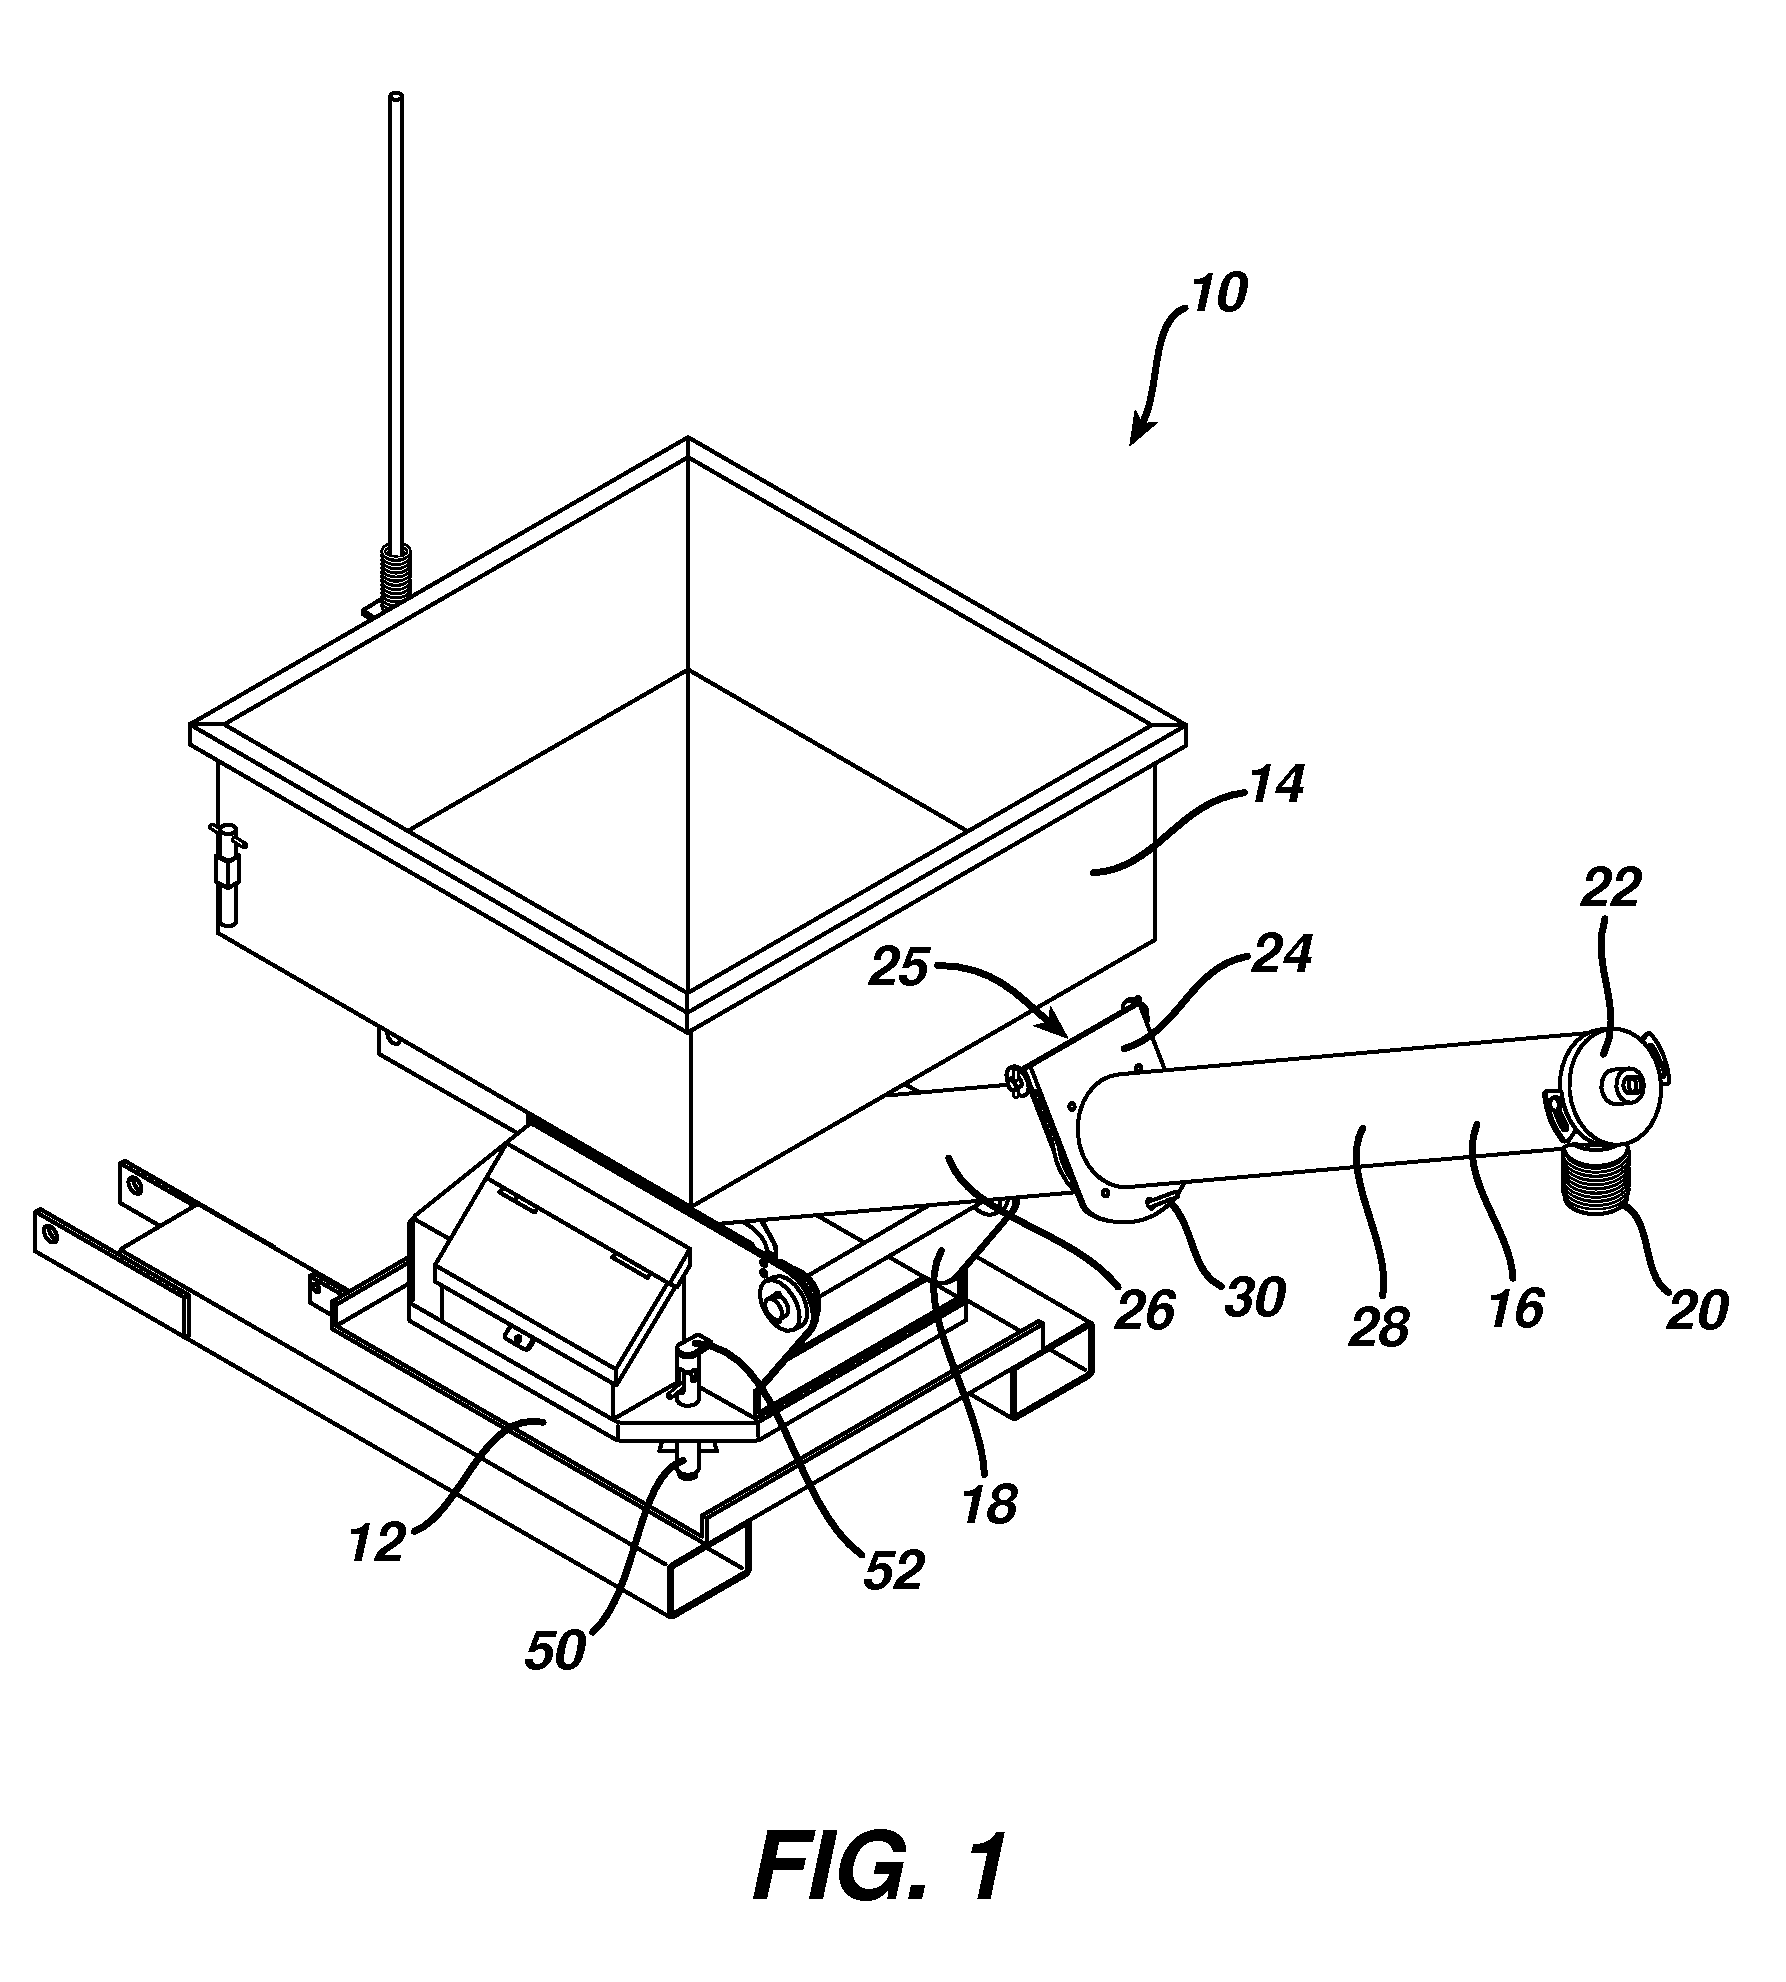 Wet cement dispensing apparatus with cleaning and access features